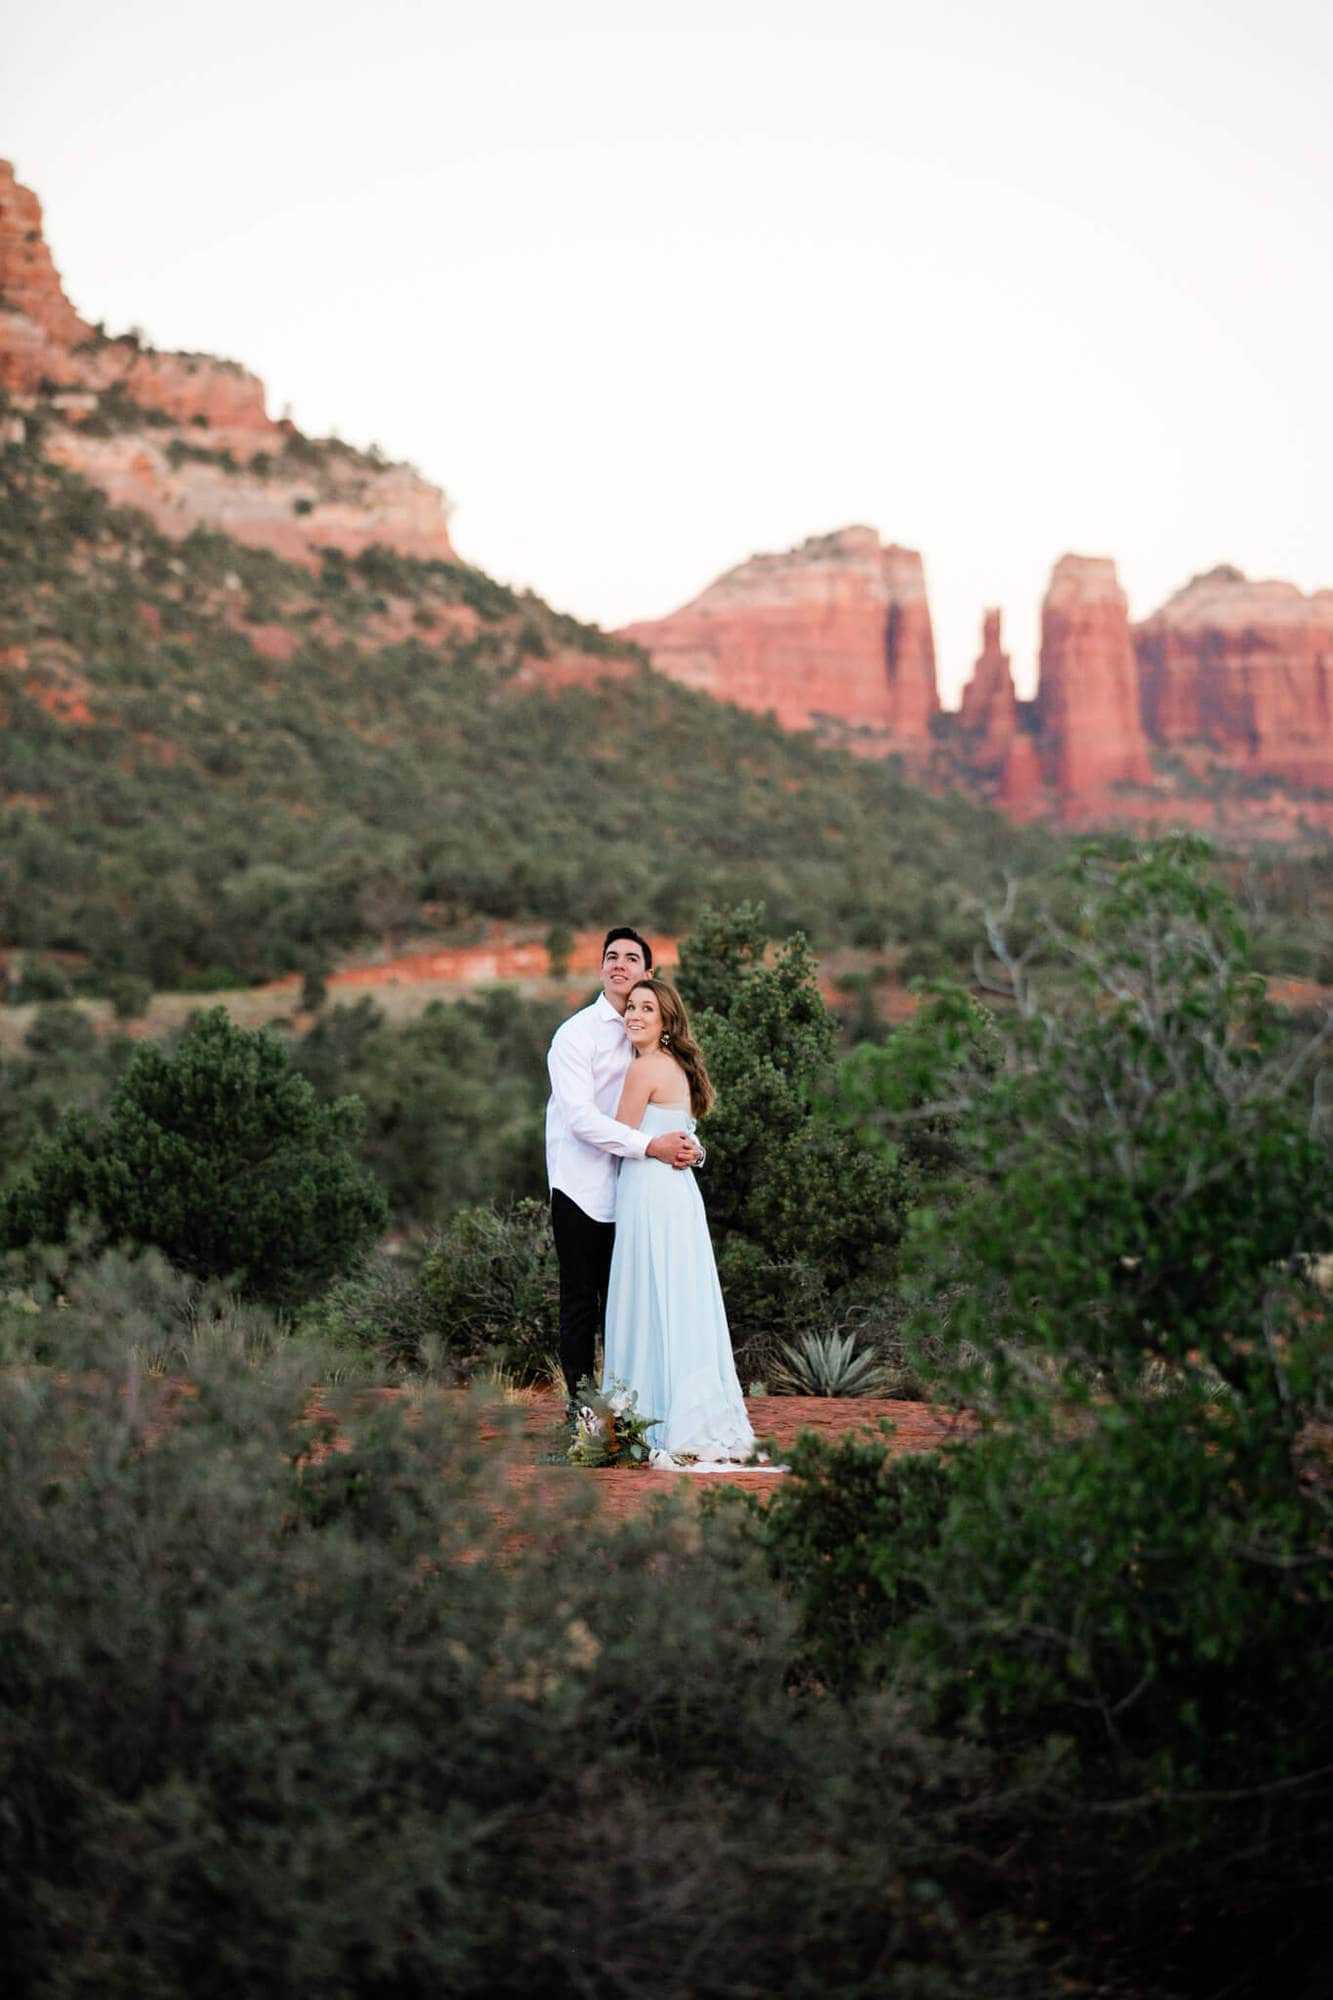 Wrapped in each others arms the bride and groom take in the beautiful red rocks around them.